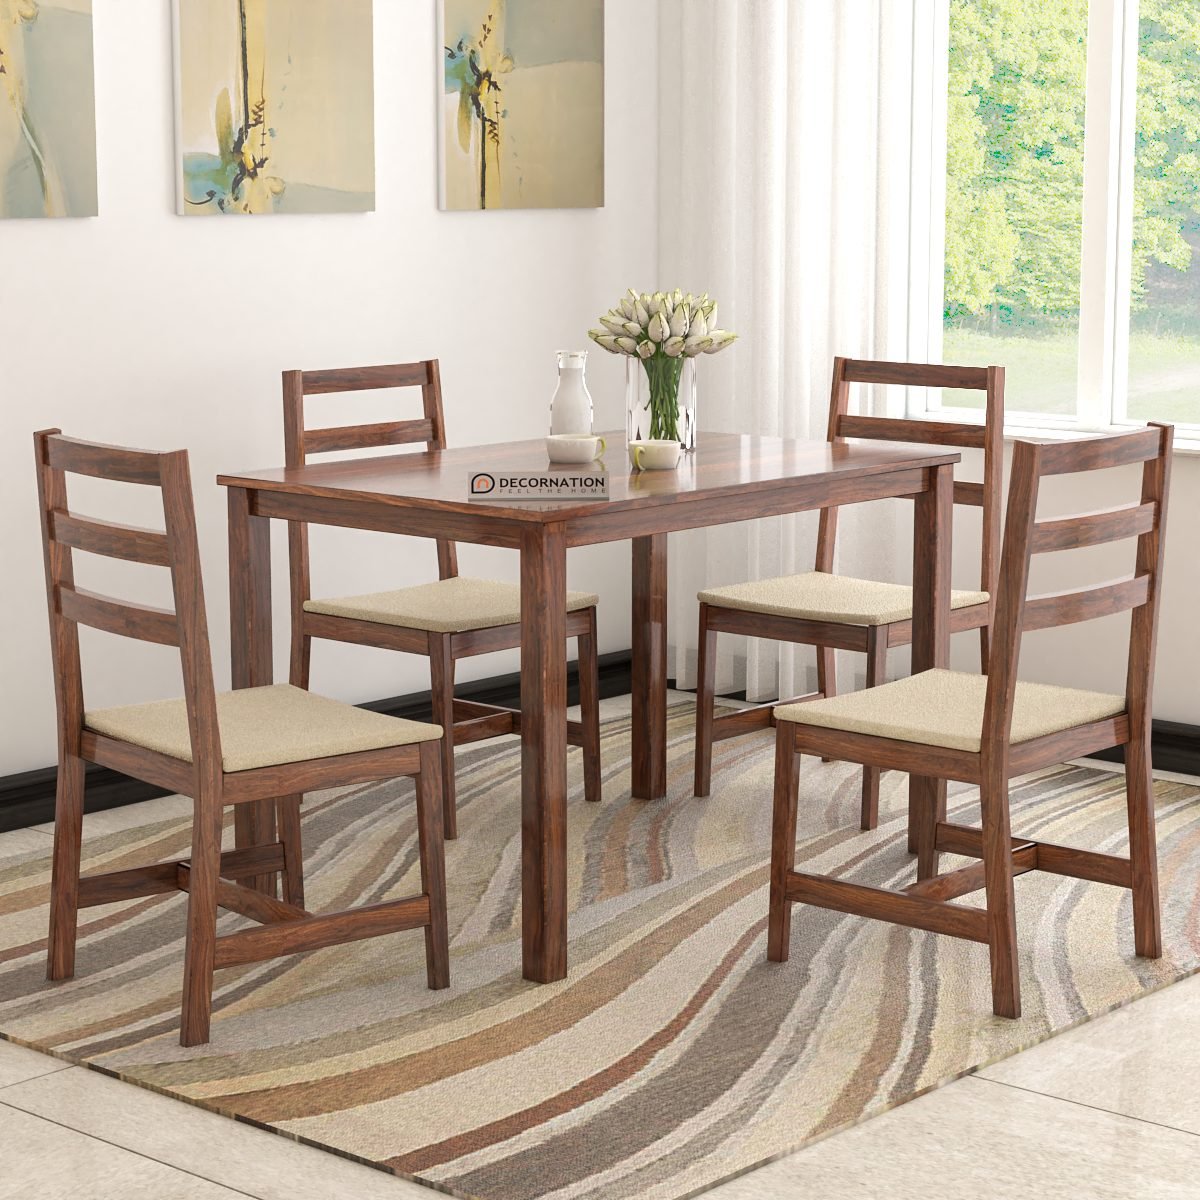 Emilia Solid Wood 4 Seater Dining Table Set